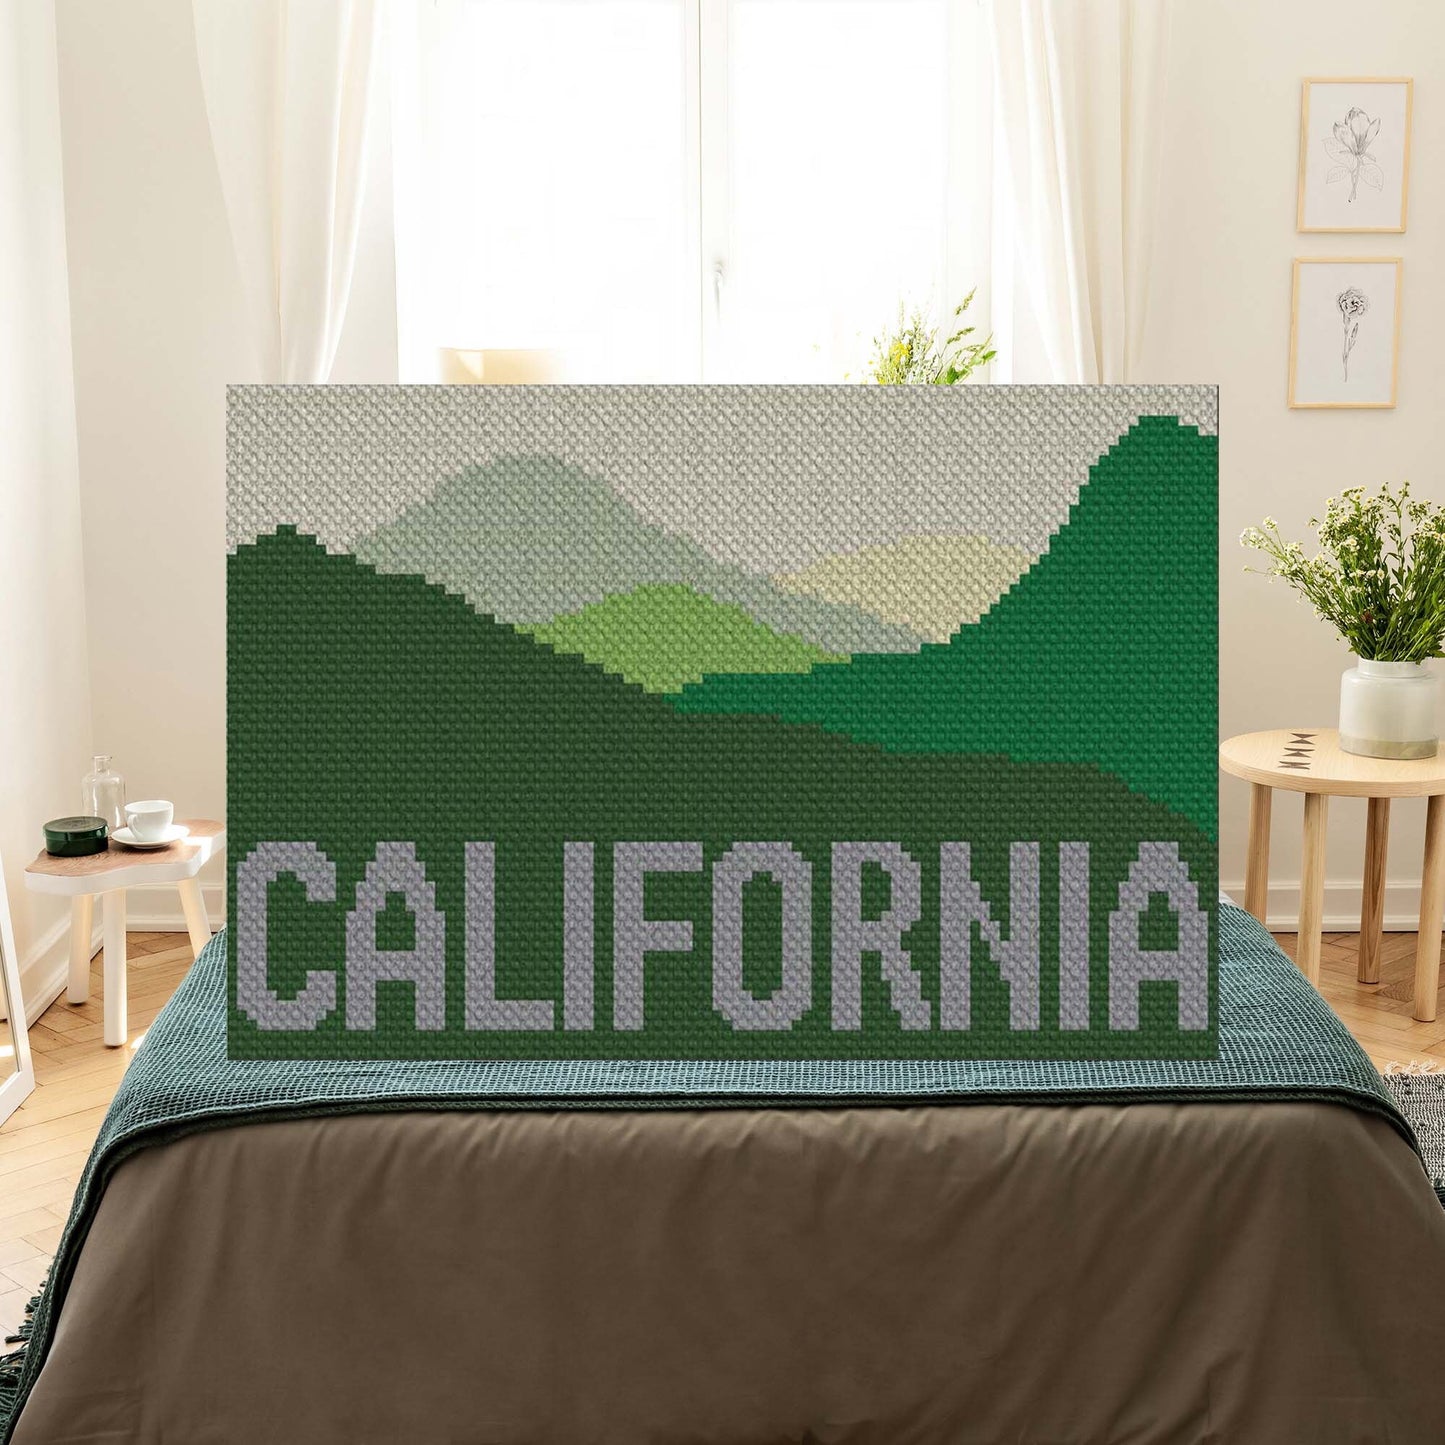 Go to the Mountains of California C2C & Graphghan Afghan Crochet Pattern